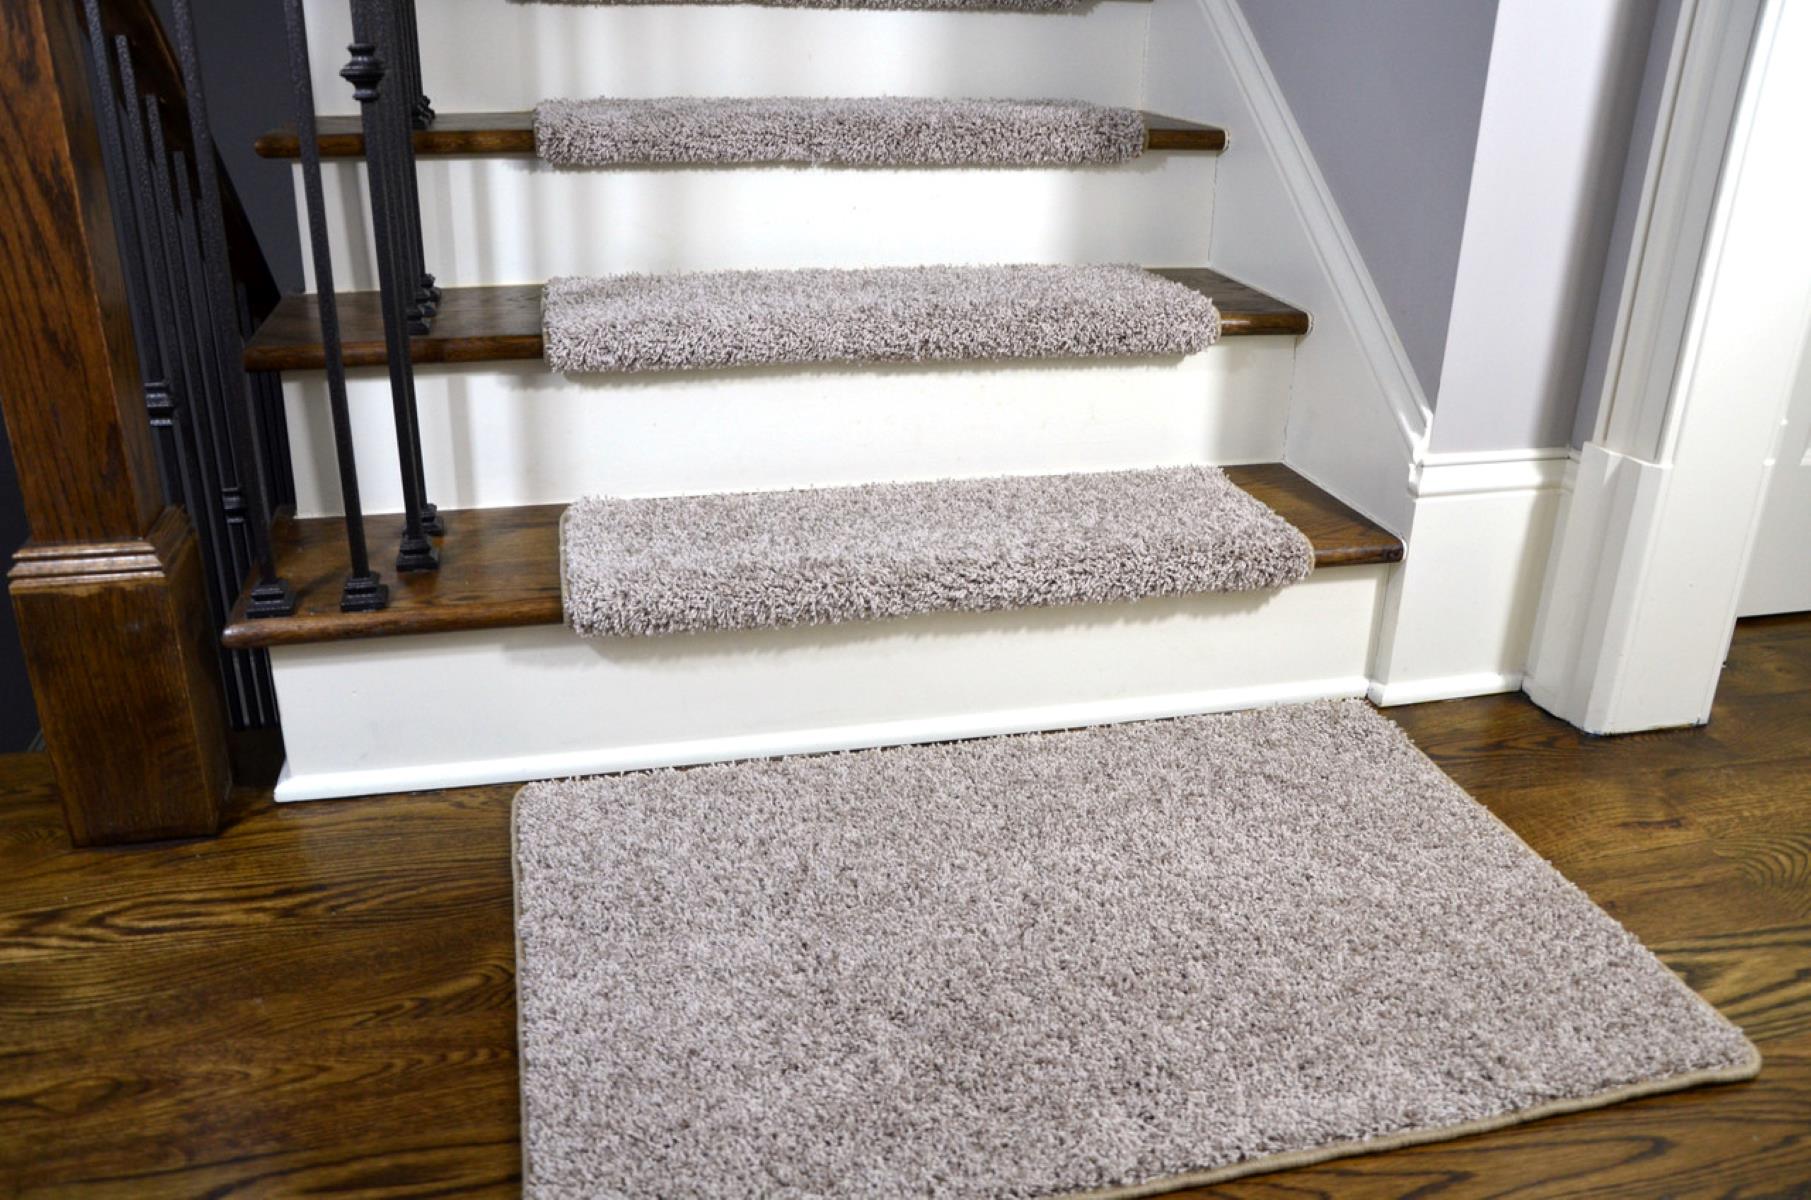 What To Put On Carpet Stairs To Prevent Slipping